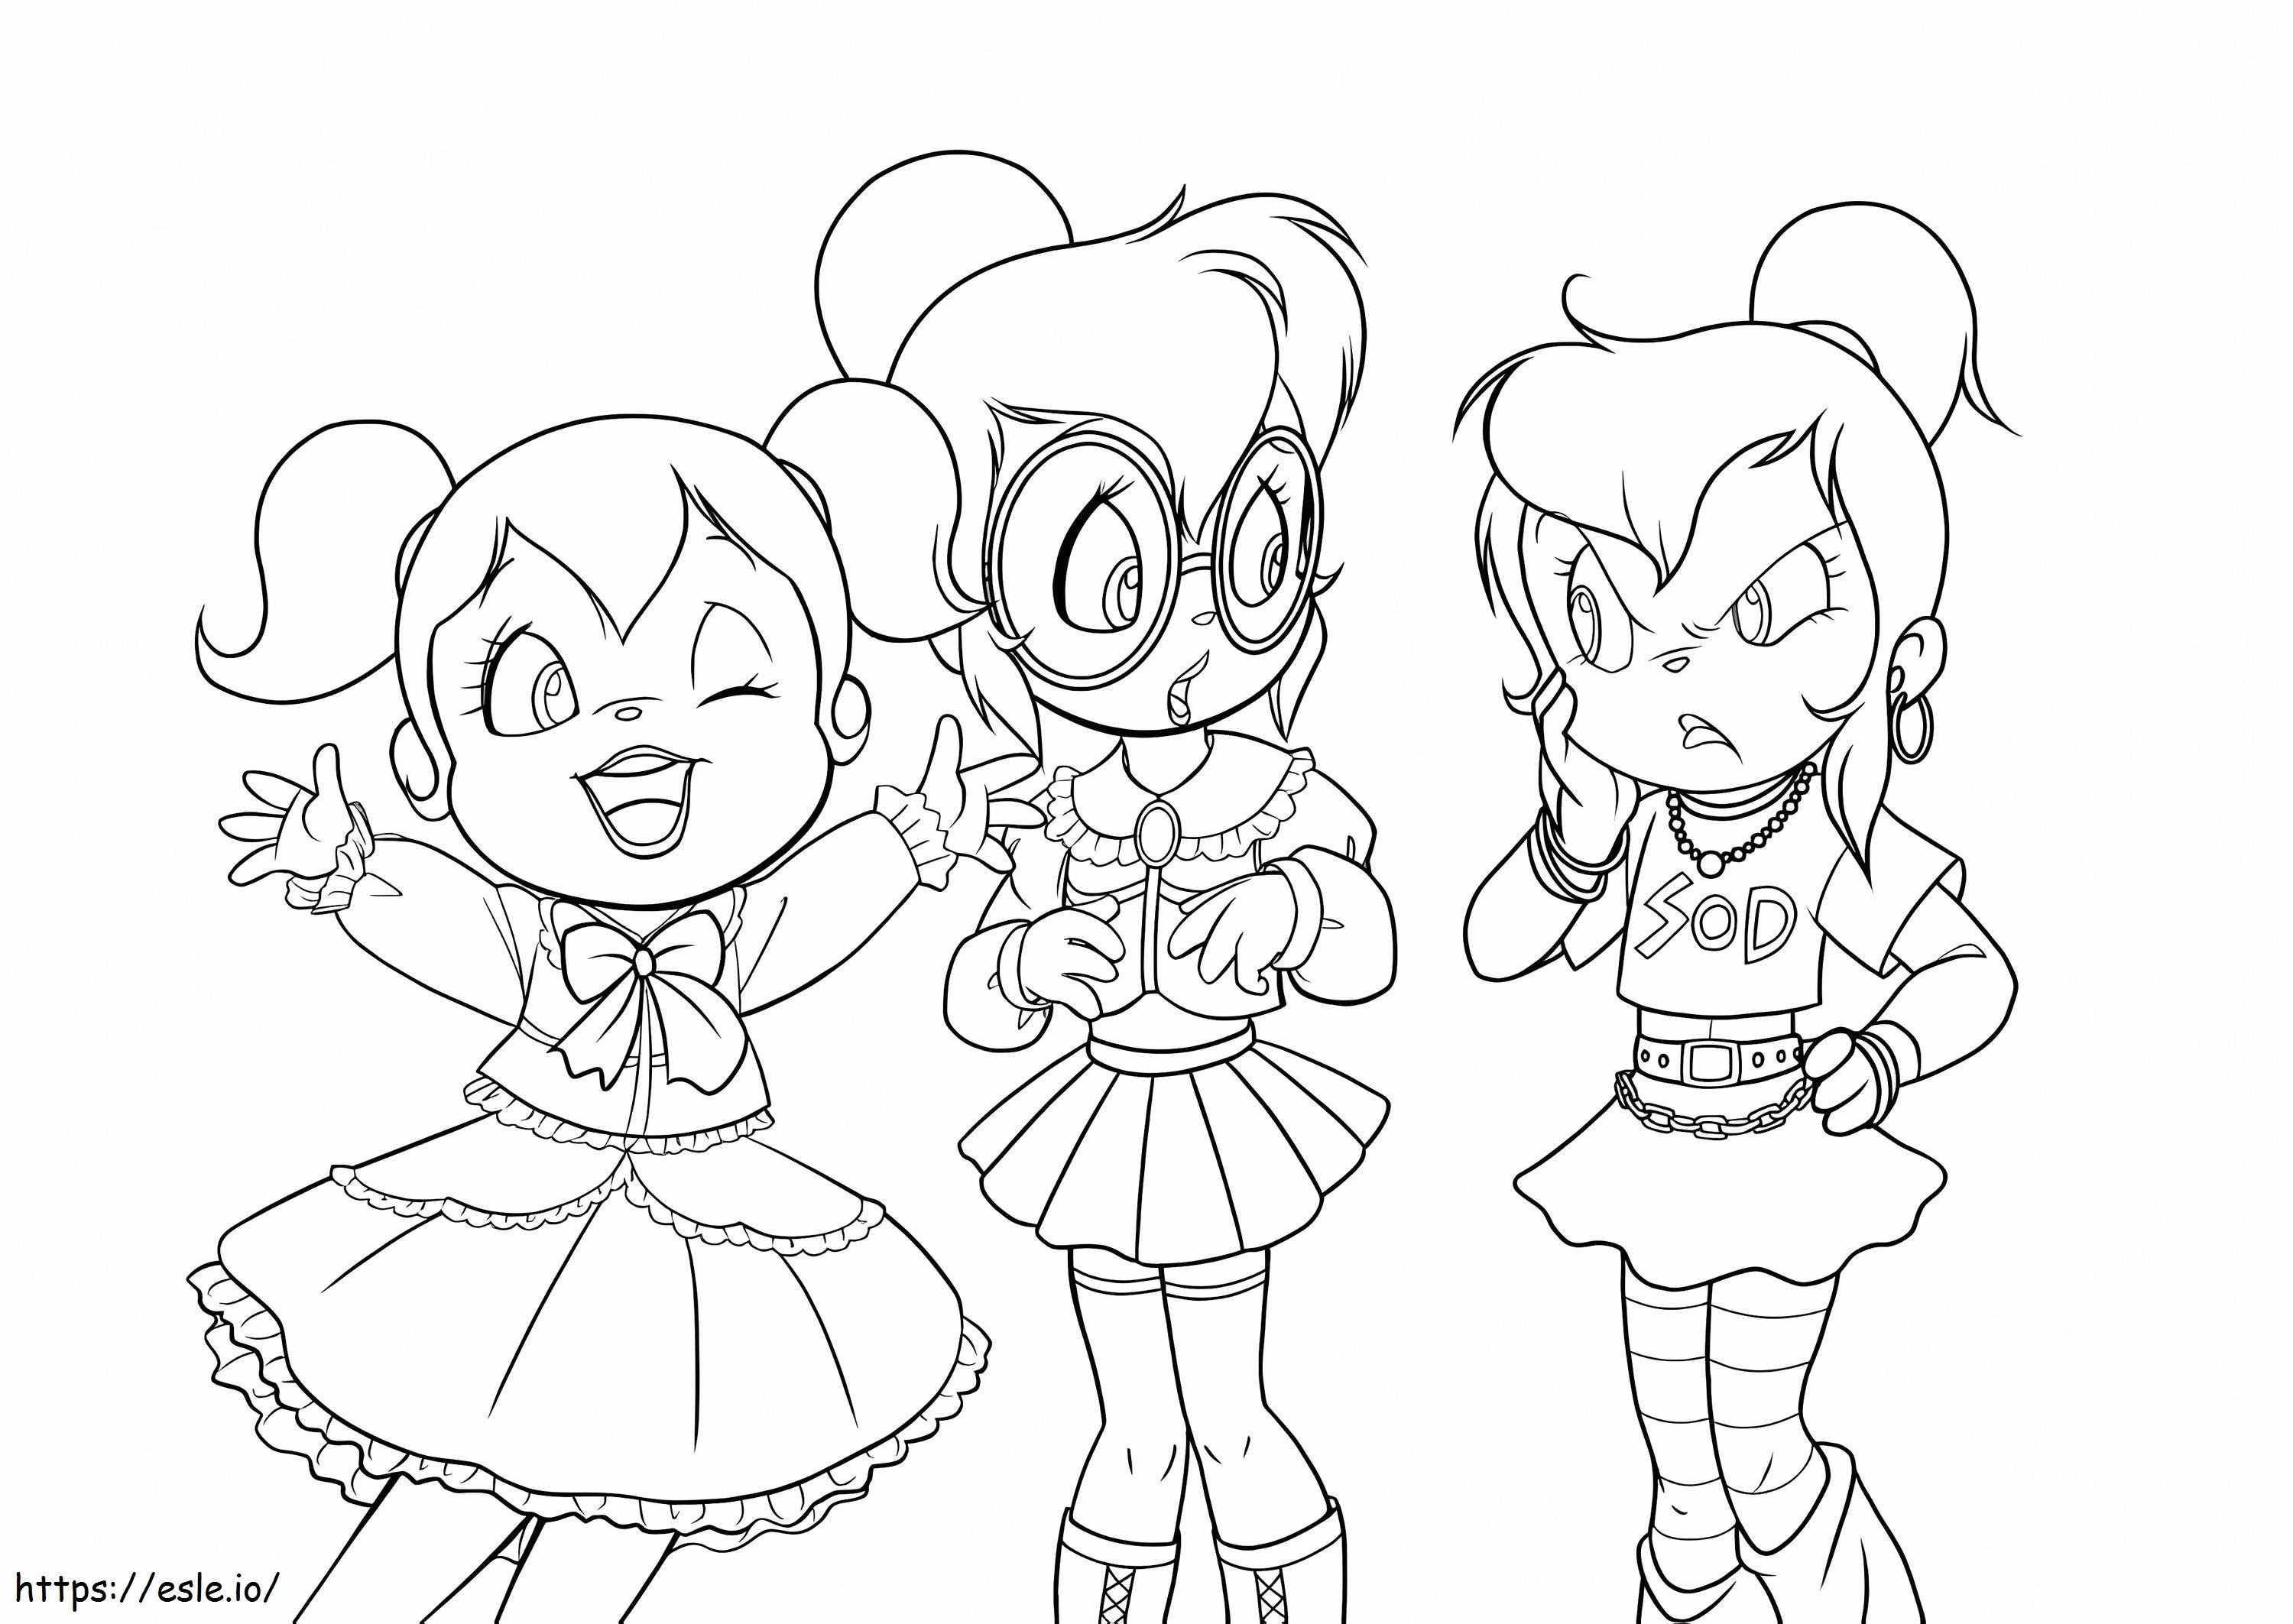 Funny Chipettes coloring page